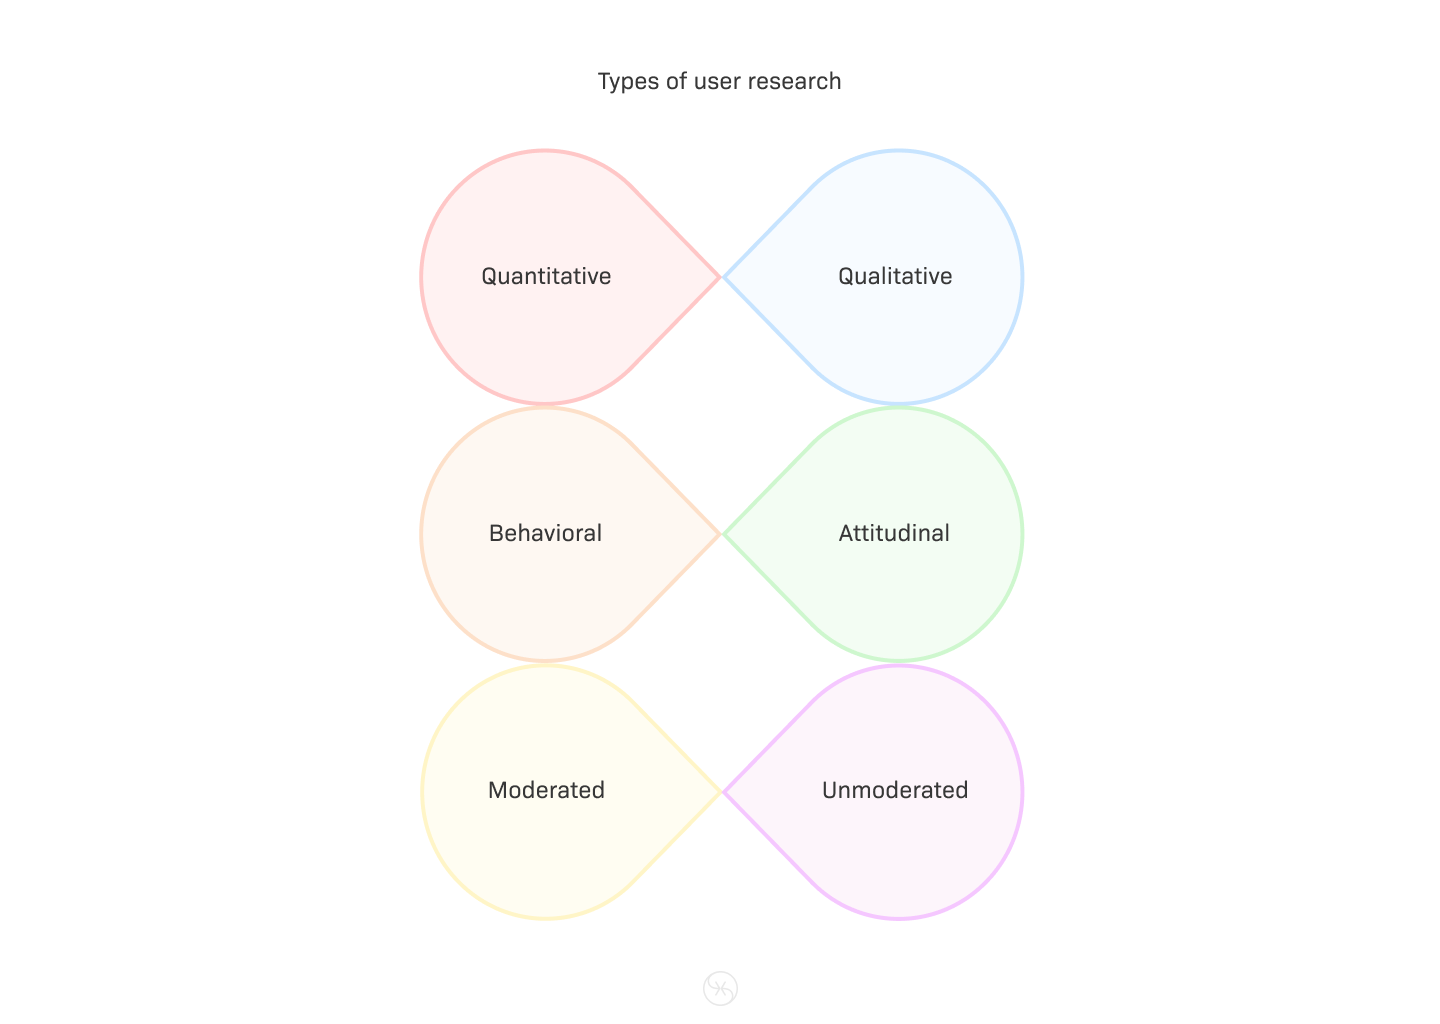 Types of user research illustration.